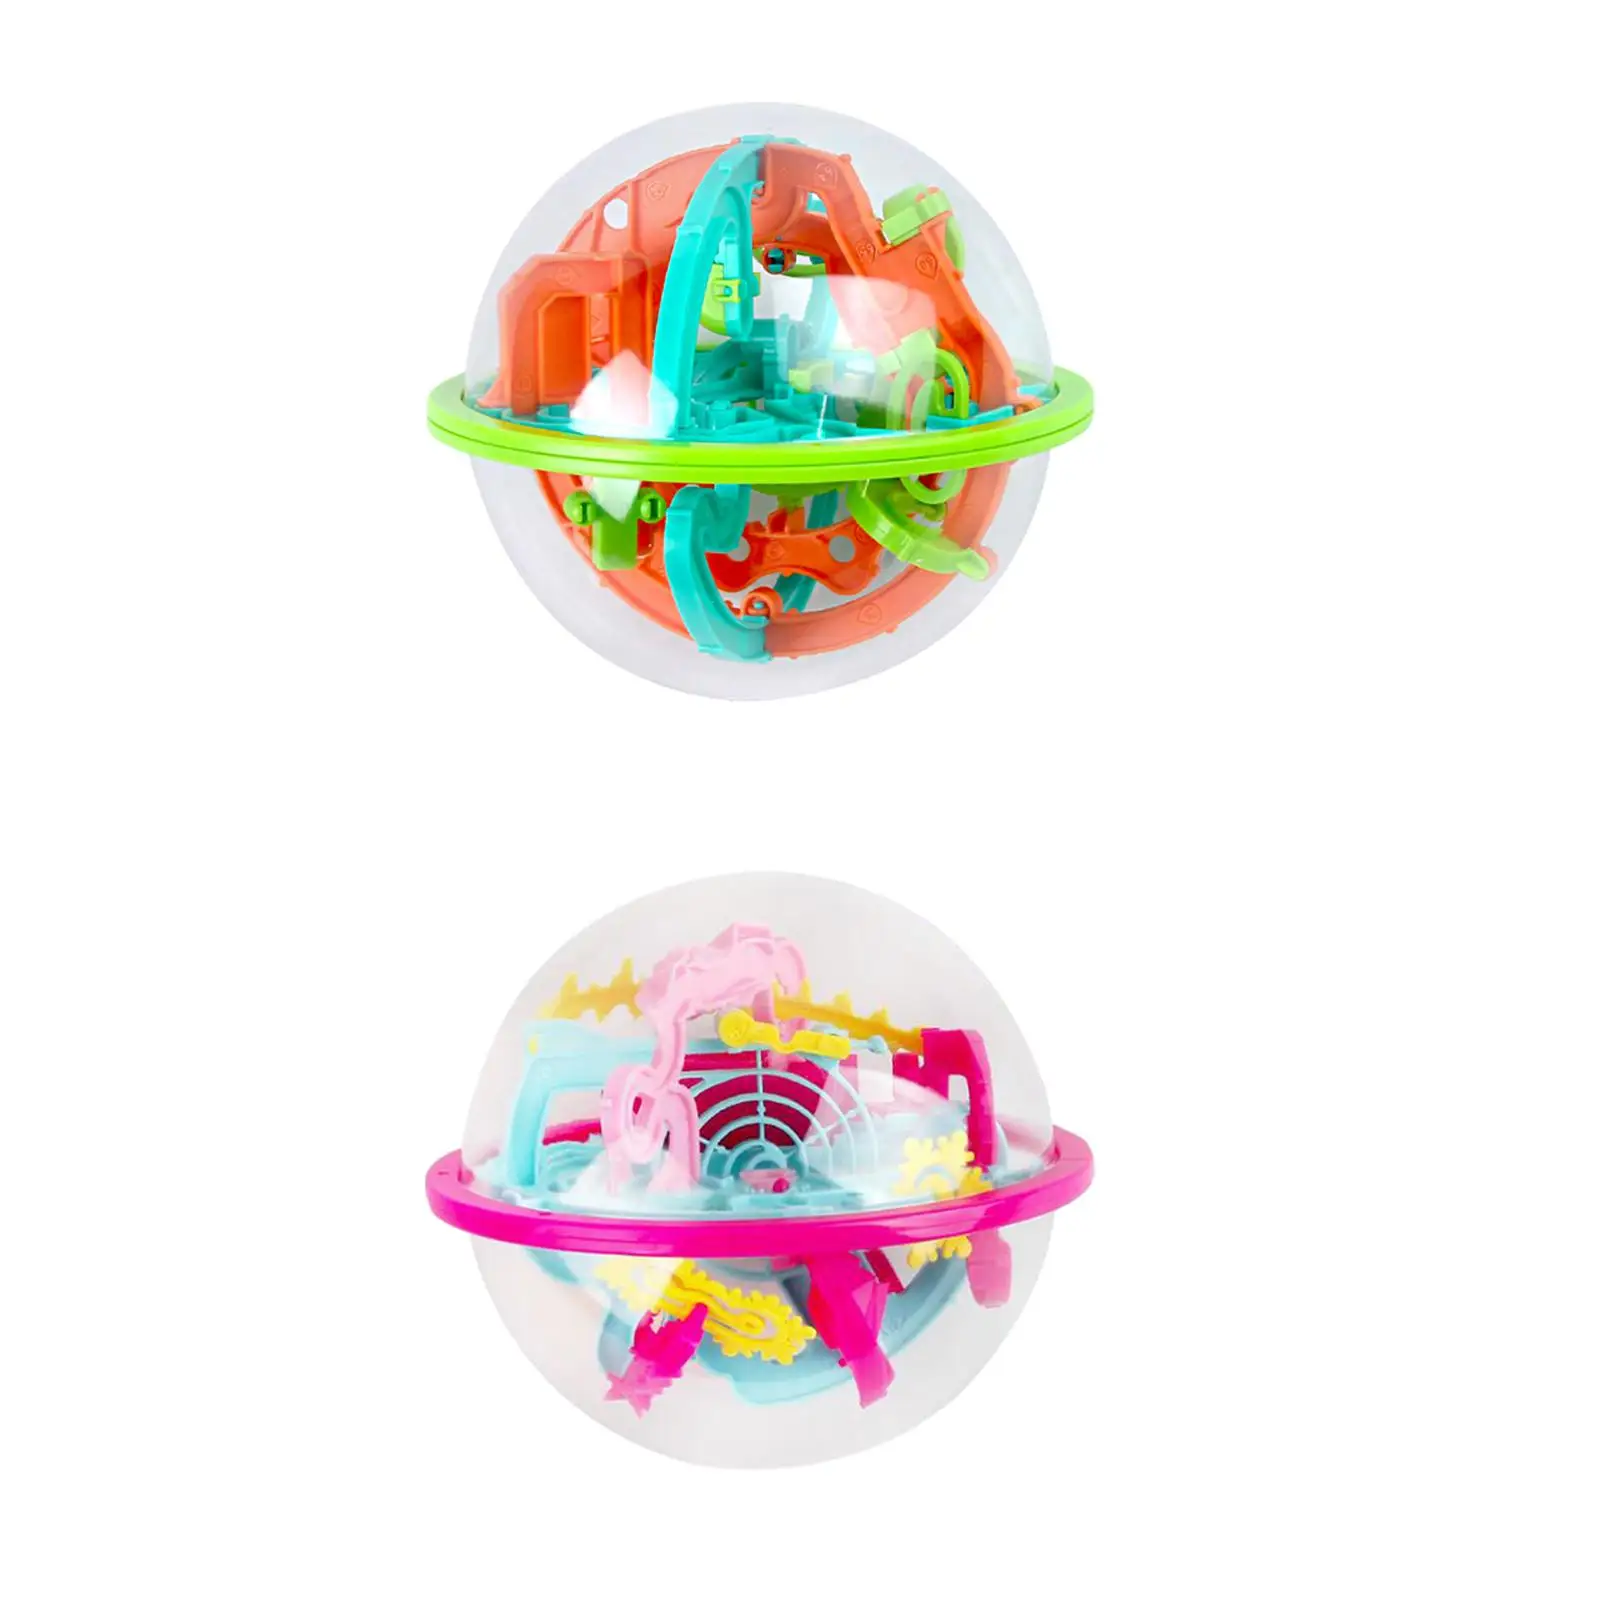 3D Maze Ball Brain Teaser Puzzles Sphere Globe Educational Toy Gravity Memory Sequential Maze for Boy Girls Adults Children